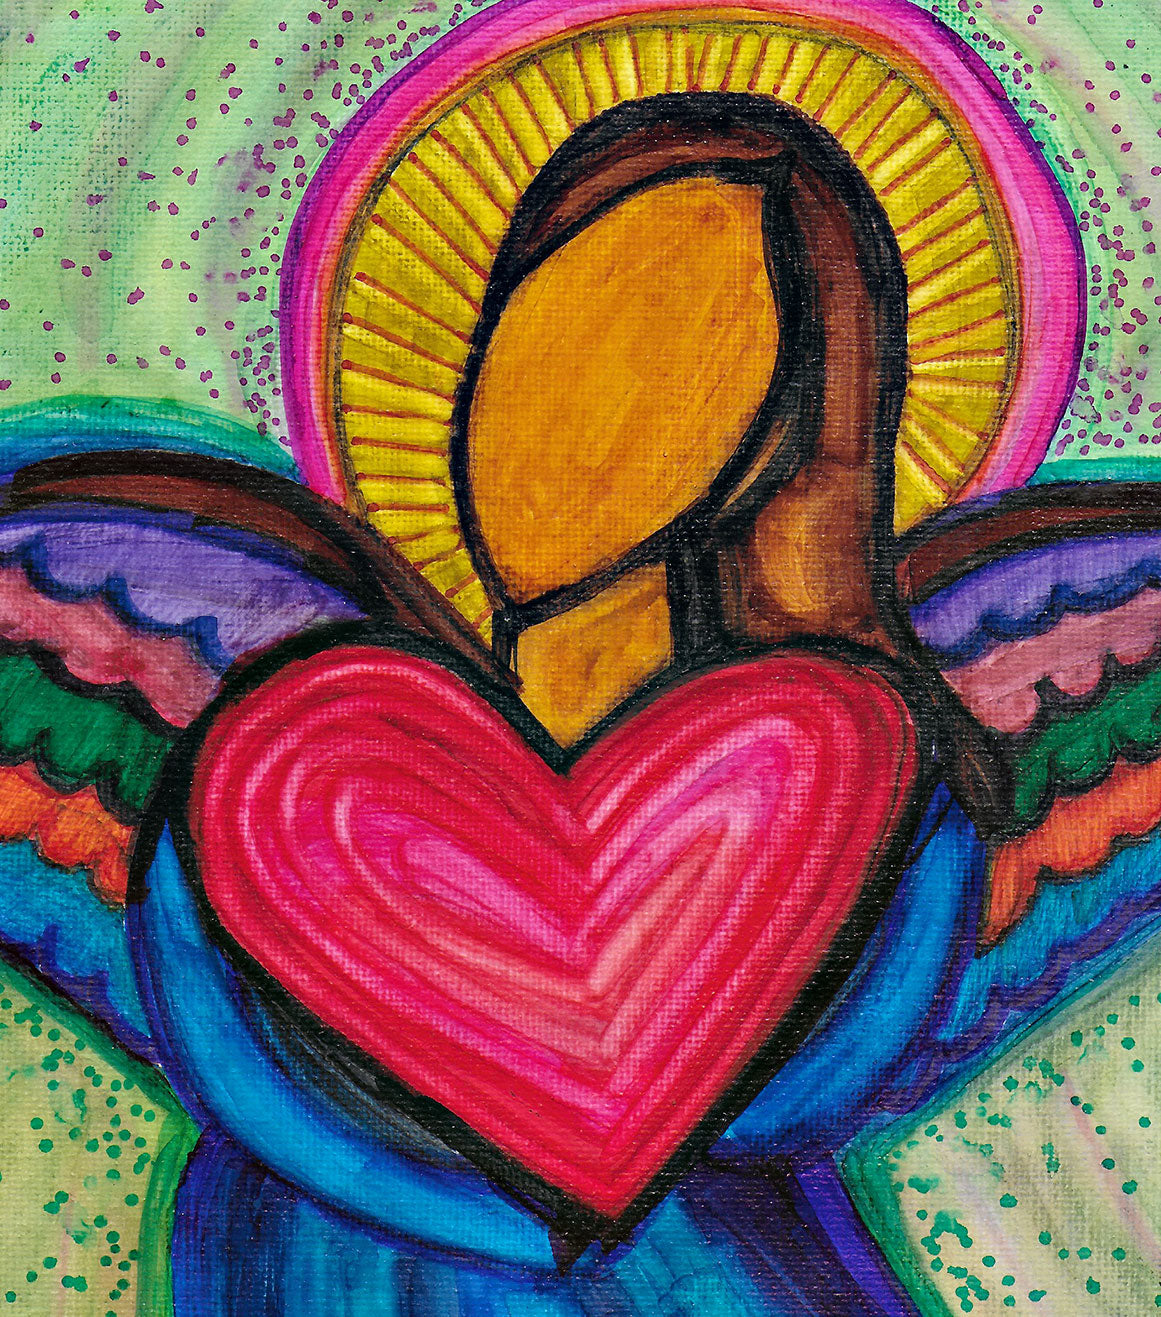 Serenity Angel, original angel folk art painting on canvas sheet, matted, 11x14 inches